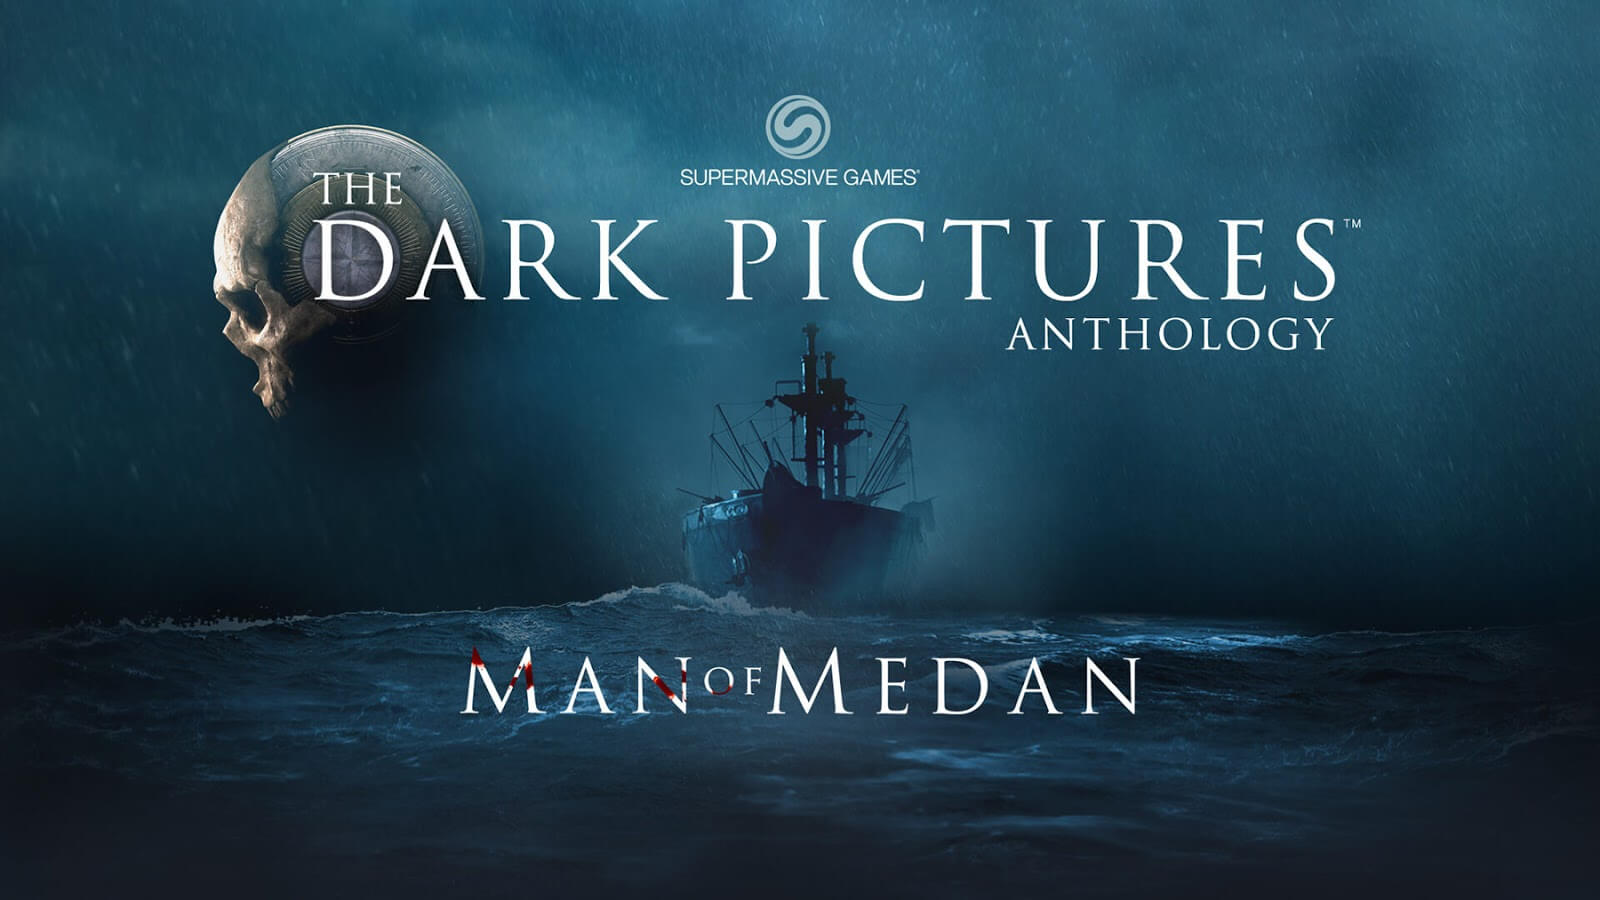 The Dark Pictures: Man of Medan free holiday friend's pass